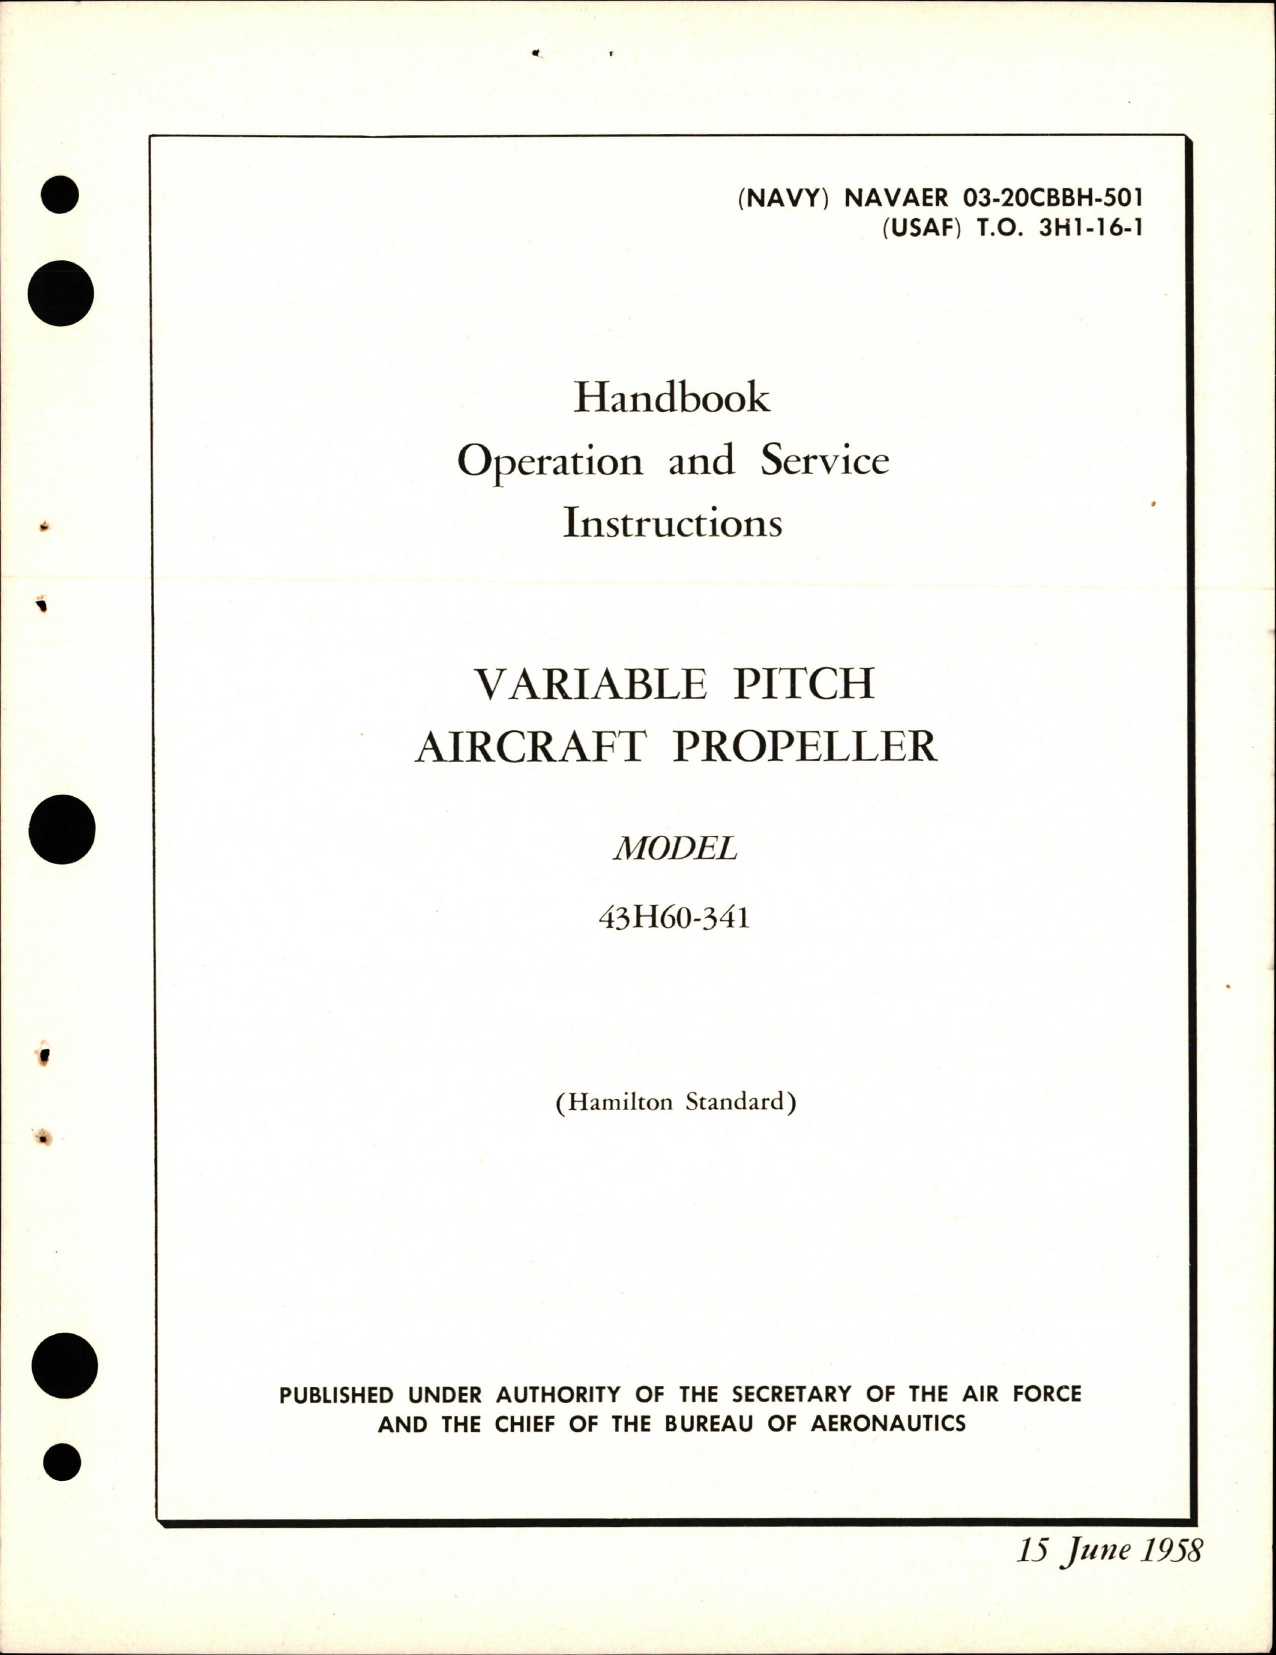 Sample page 1 from AirCorps Library document: Operation and Service Instructions for Variable Pitch Propeller - Model 43H60-341